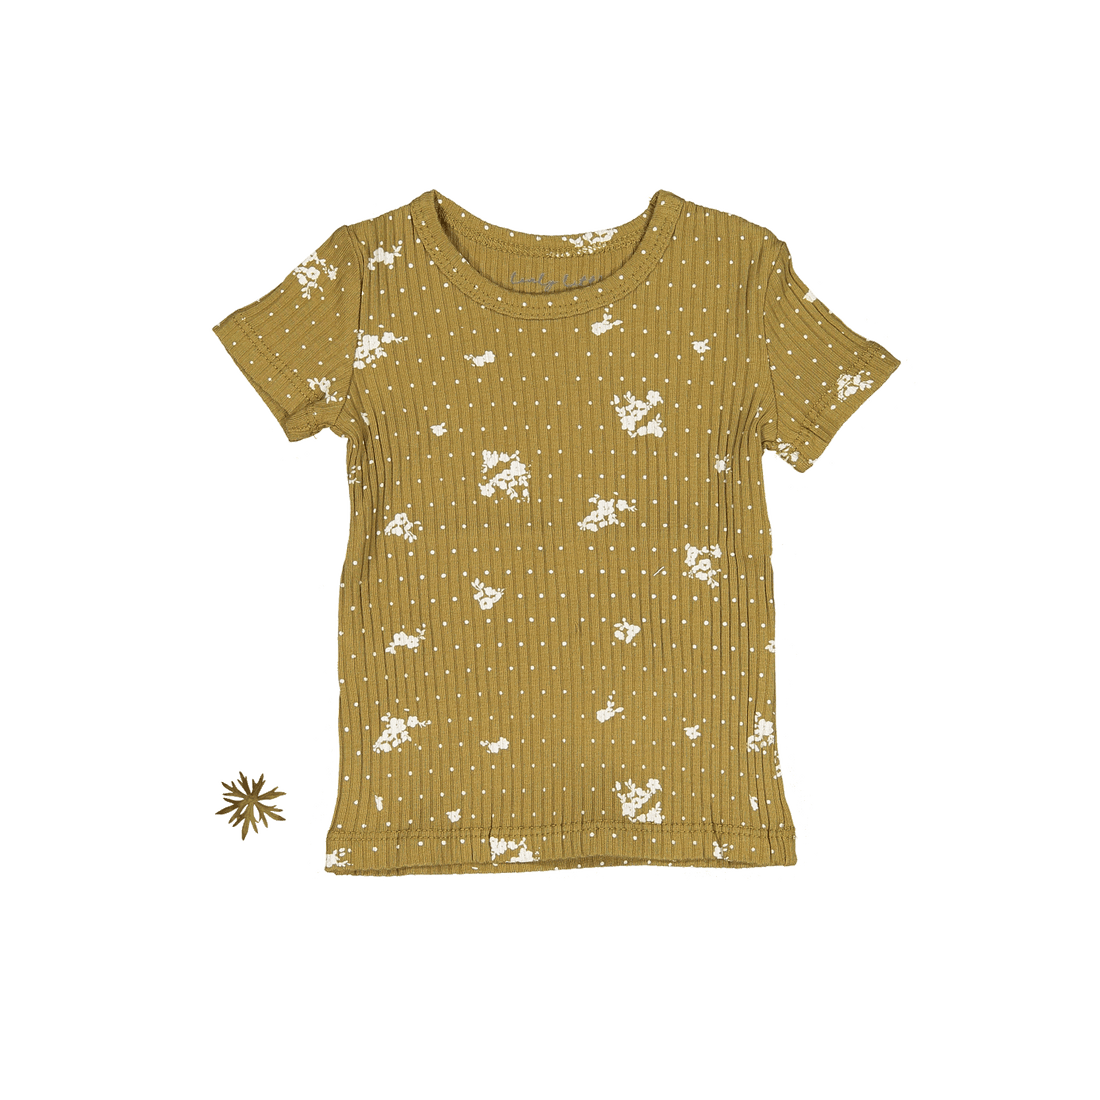 The Printed Short Sleeve Tee - Golden Floral